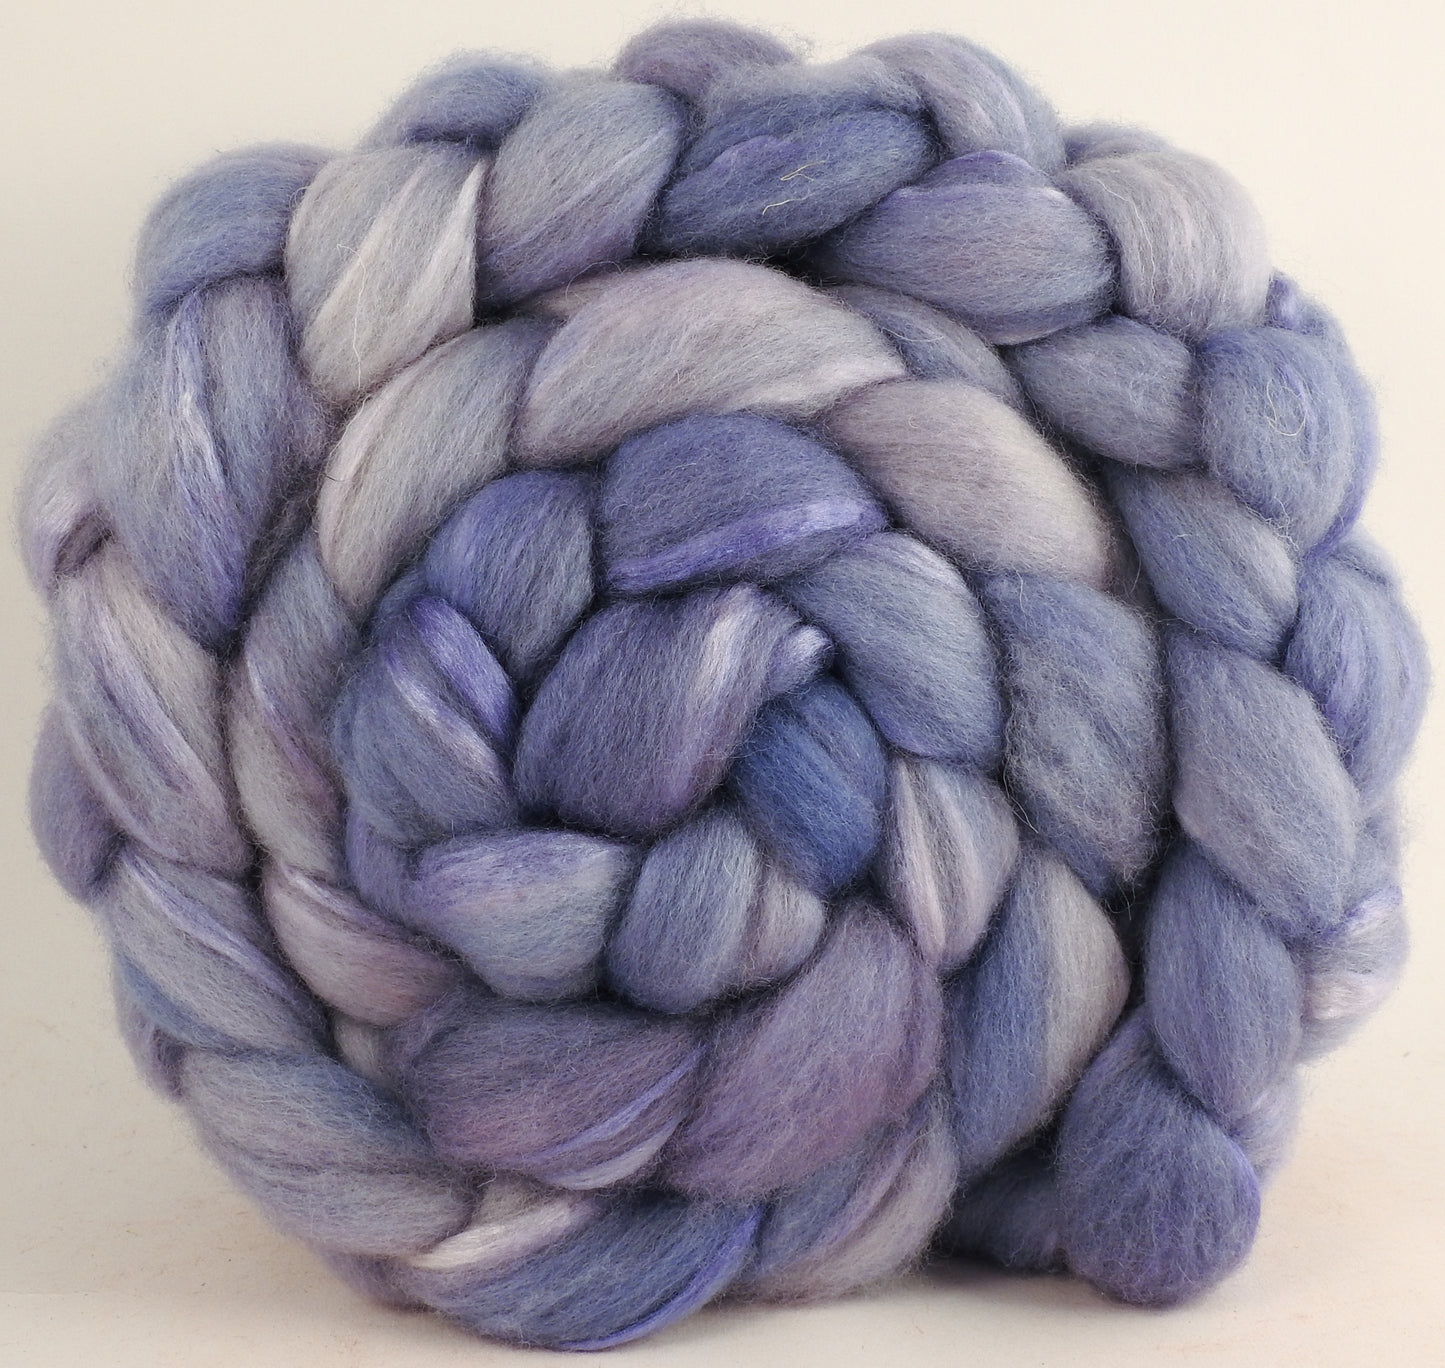 Blue-faced Leicester/ Tussah Silk (70/30) - Silver Lining - (5.6 oz.)